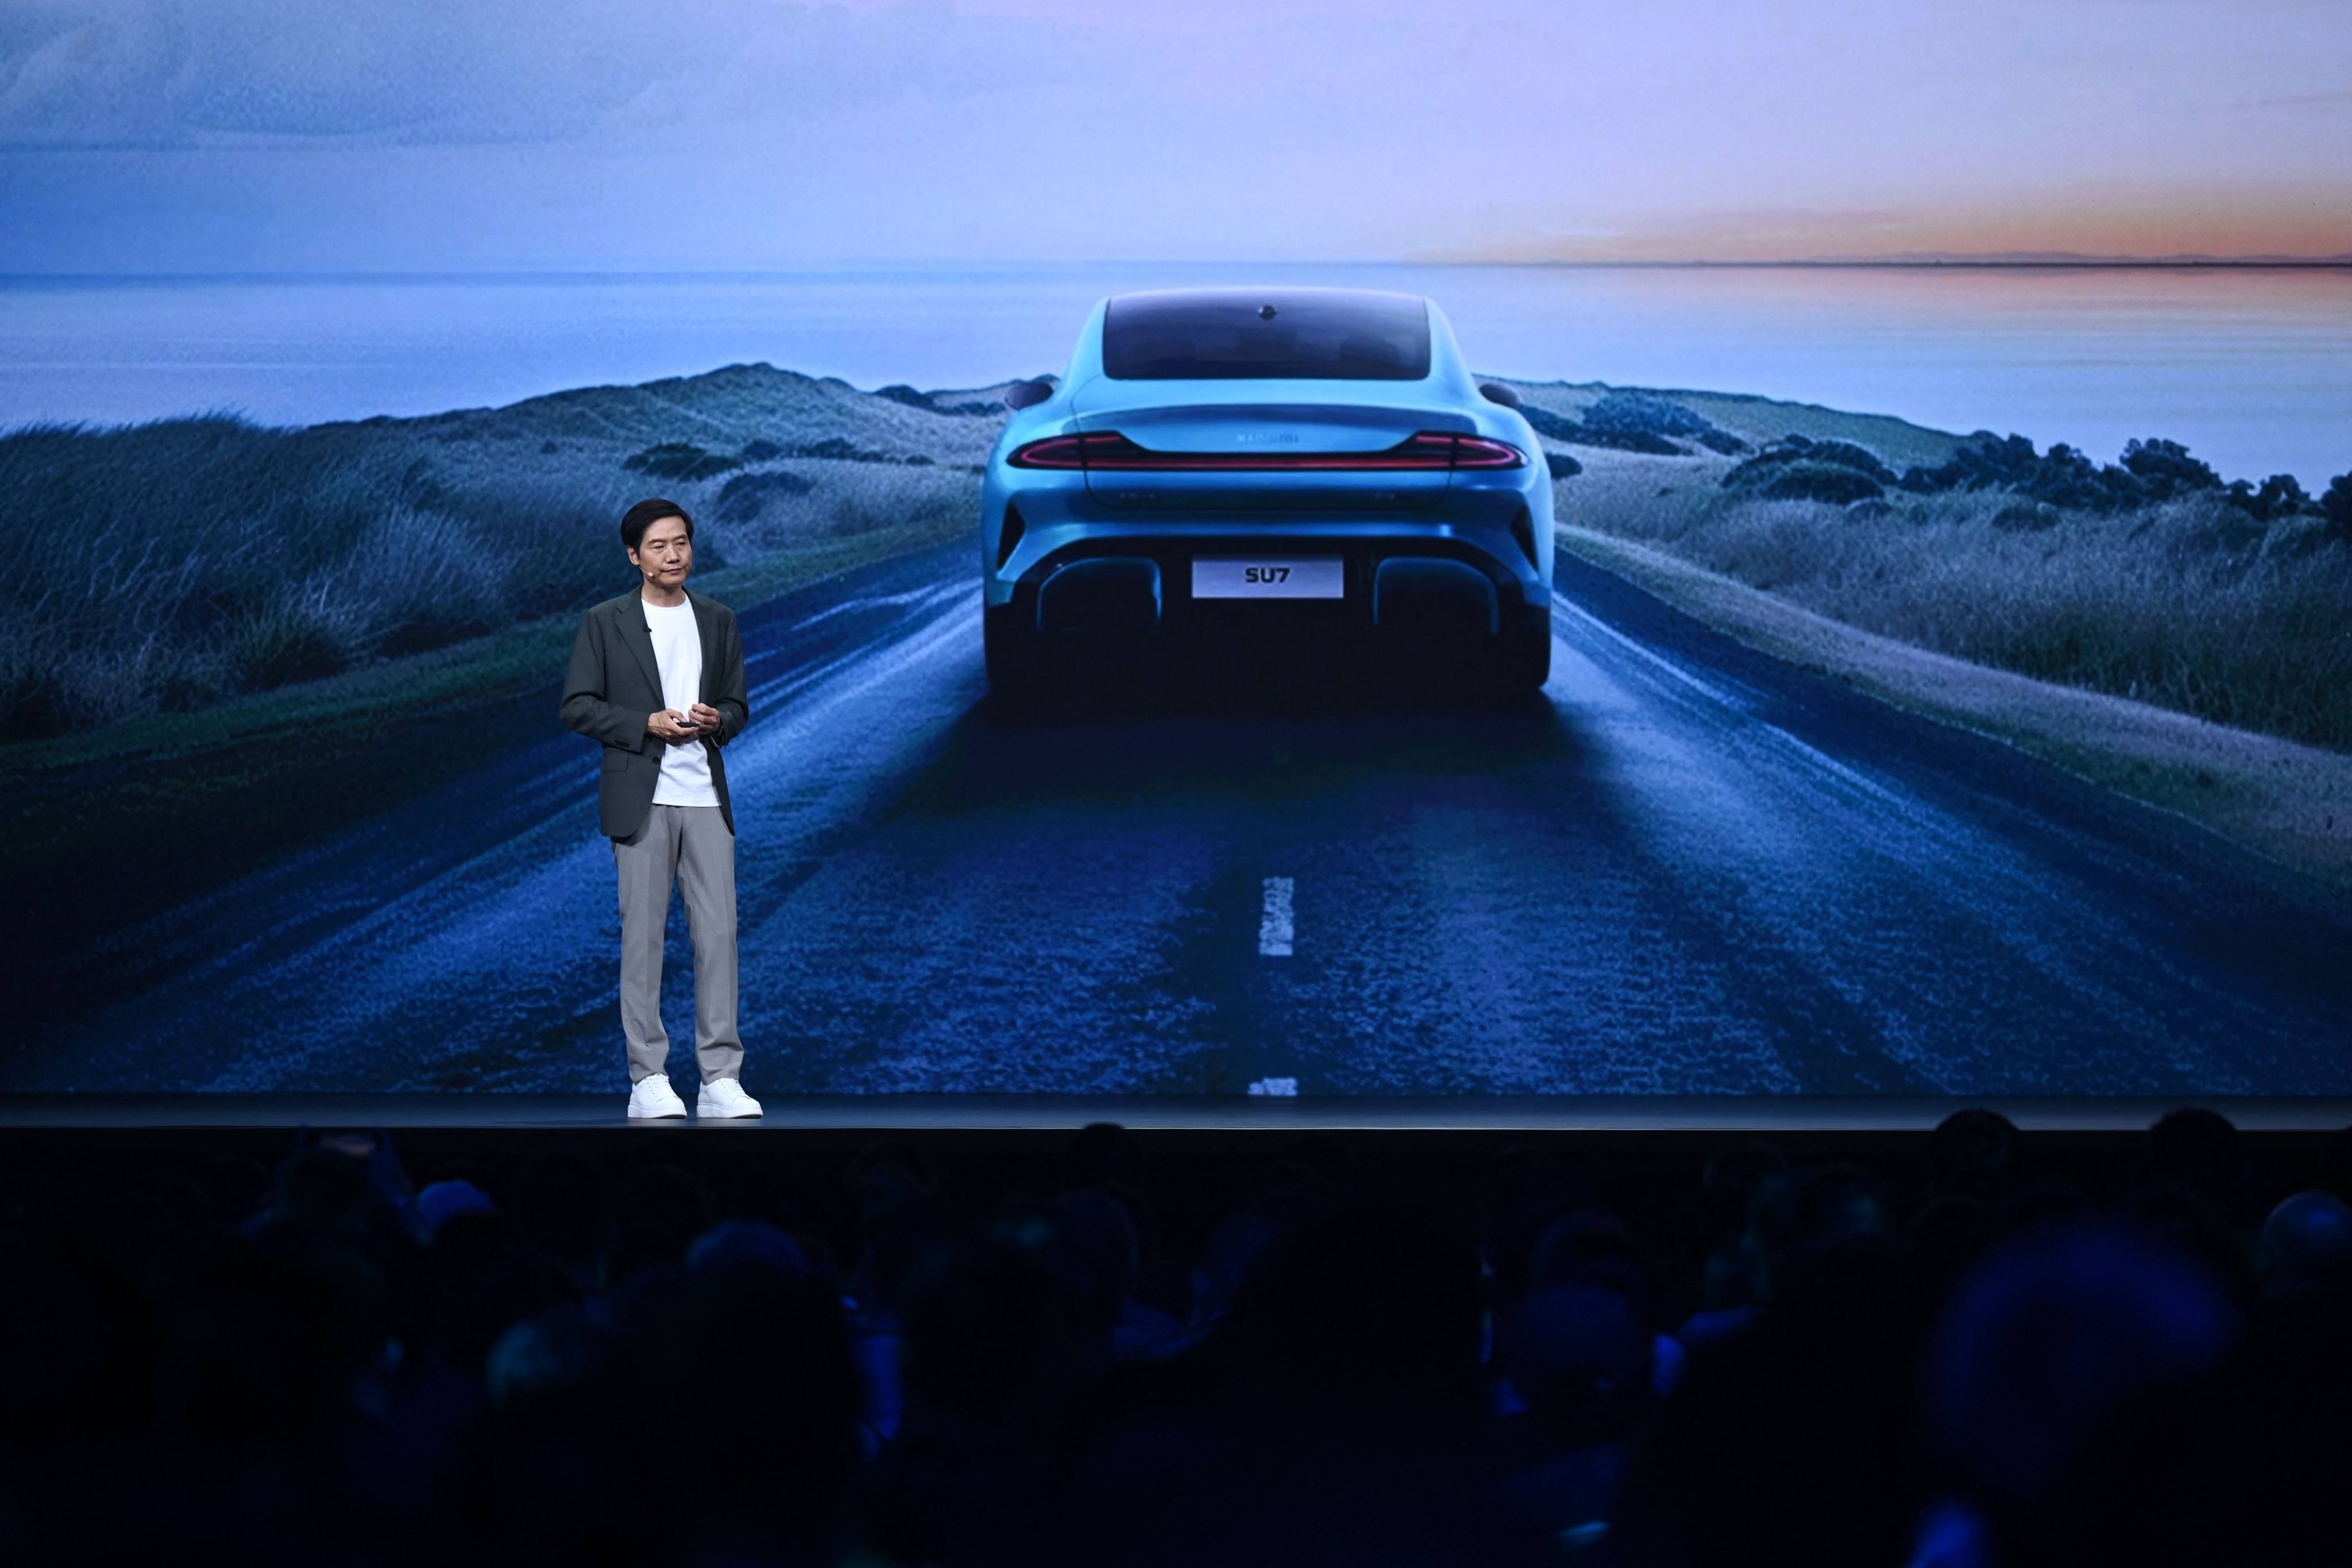 Xiaomi founder and CEO Lei Jun speaks in front of an image of the SU7 sedan at an event in Beijing on July 19. Photo: AFP